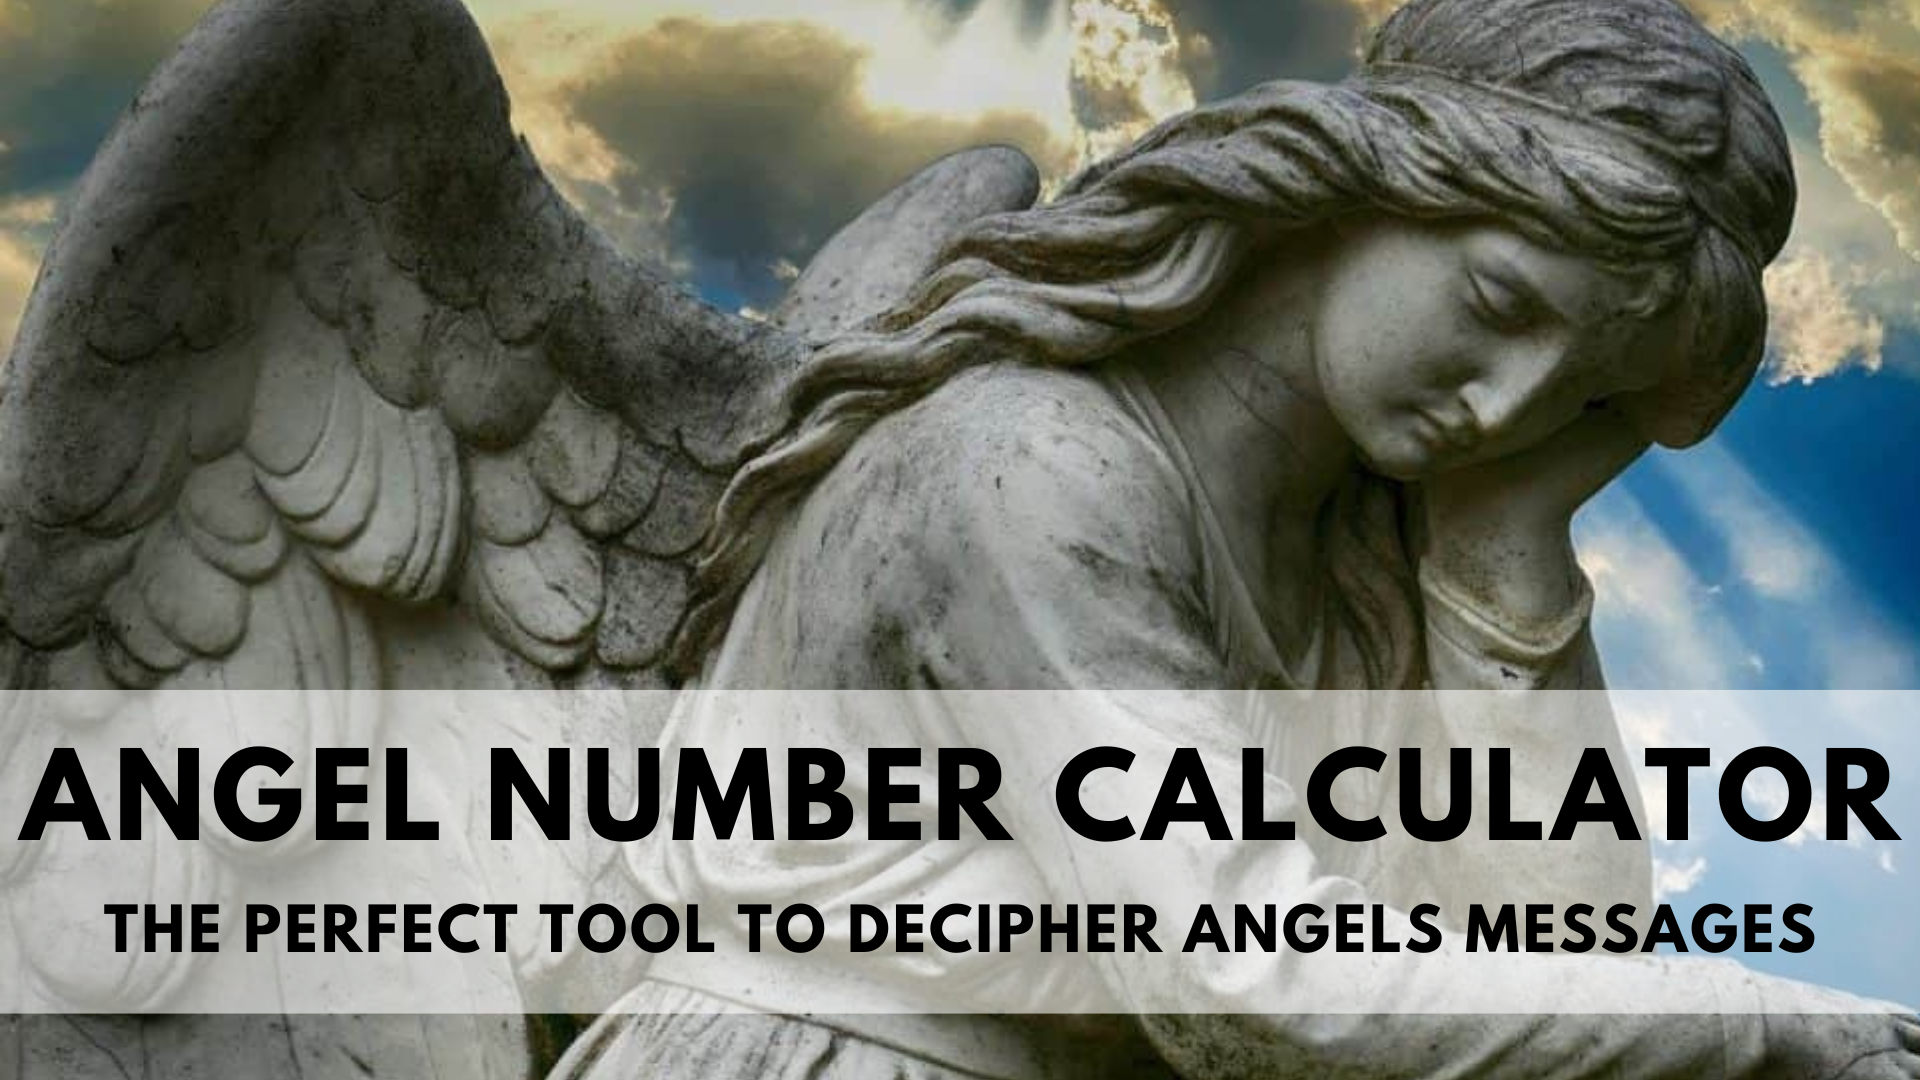 Angel Number Calculator - The Perfect Tool To Decipher Angels' Messages